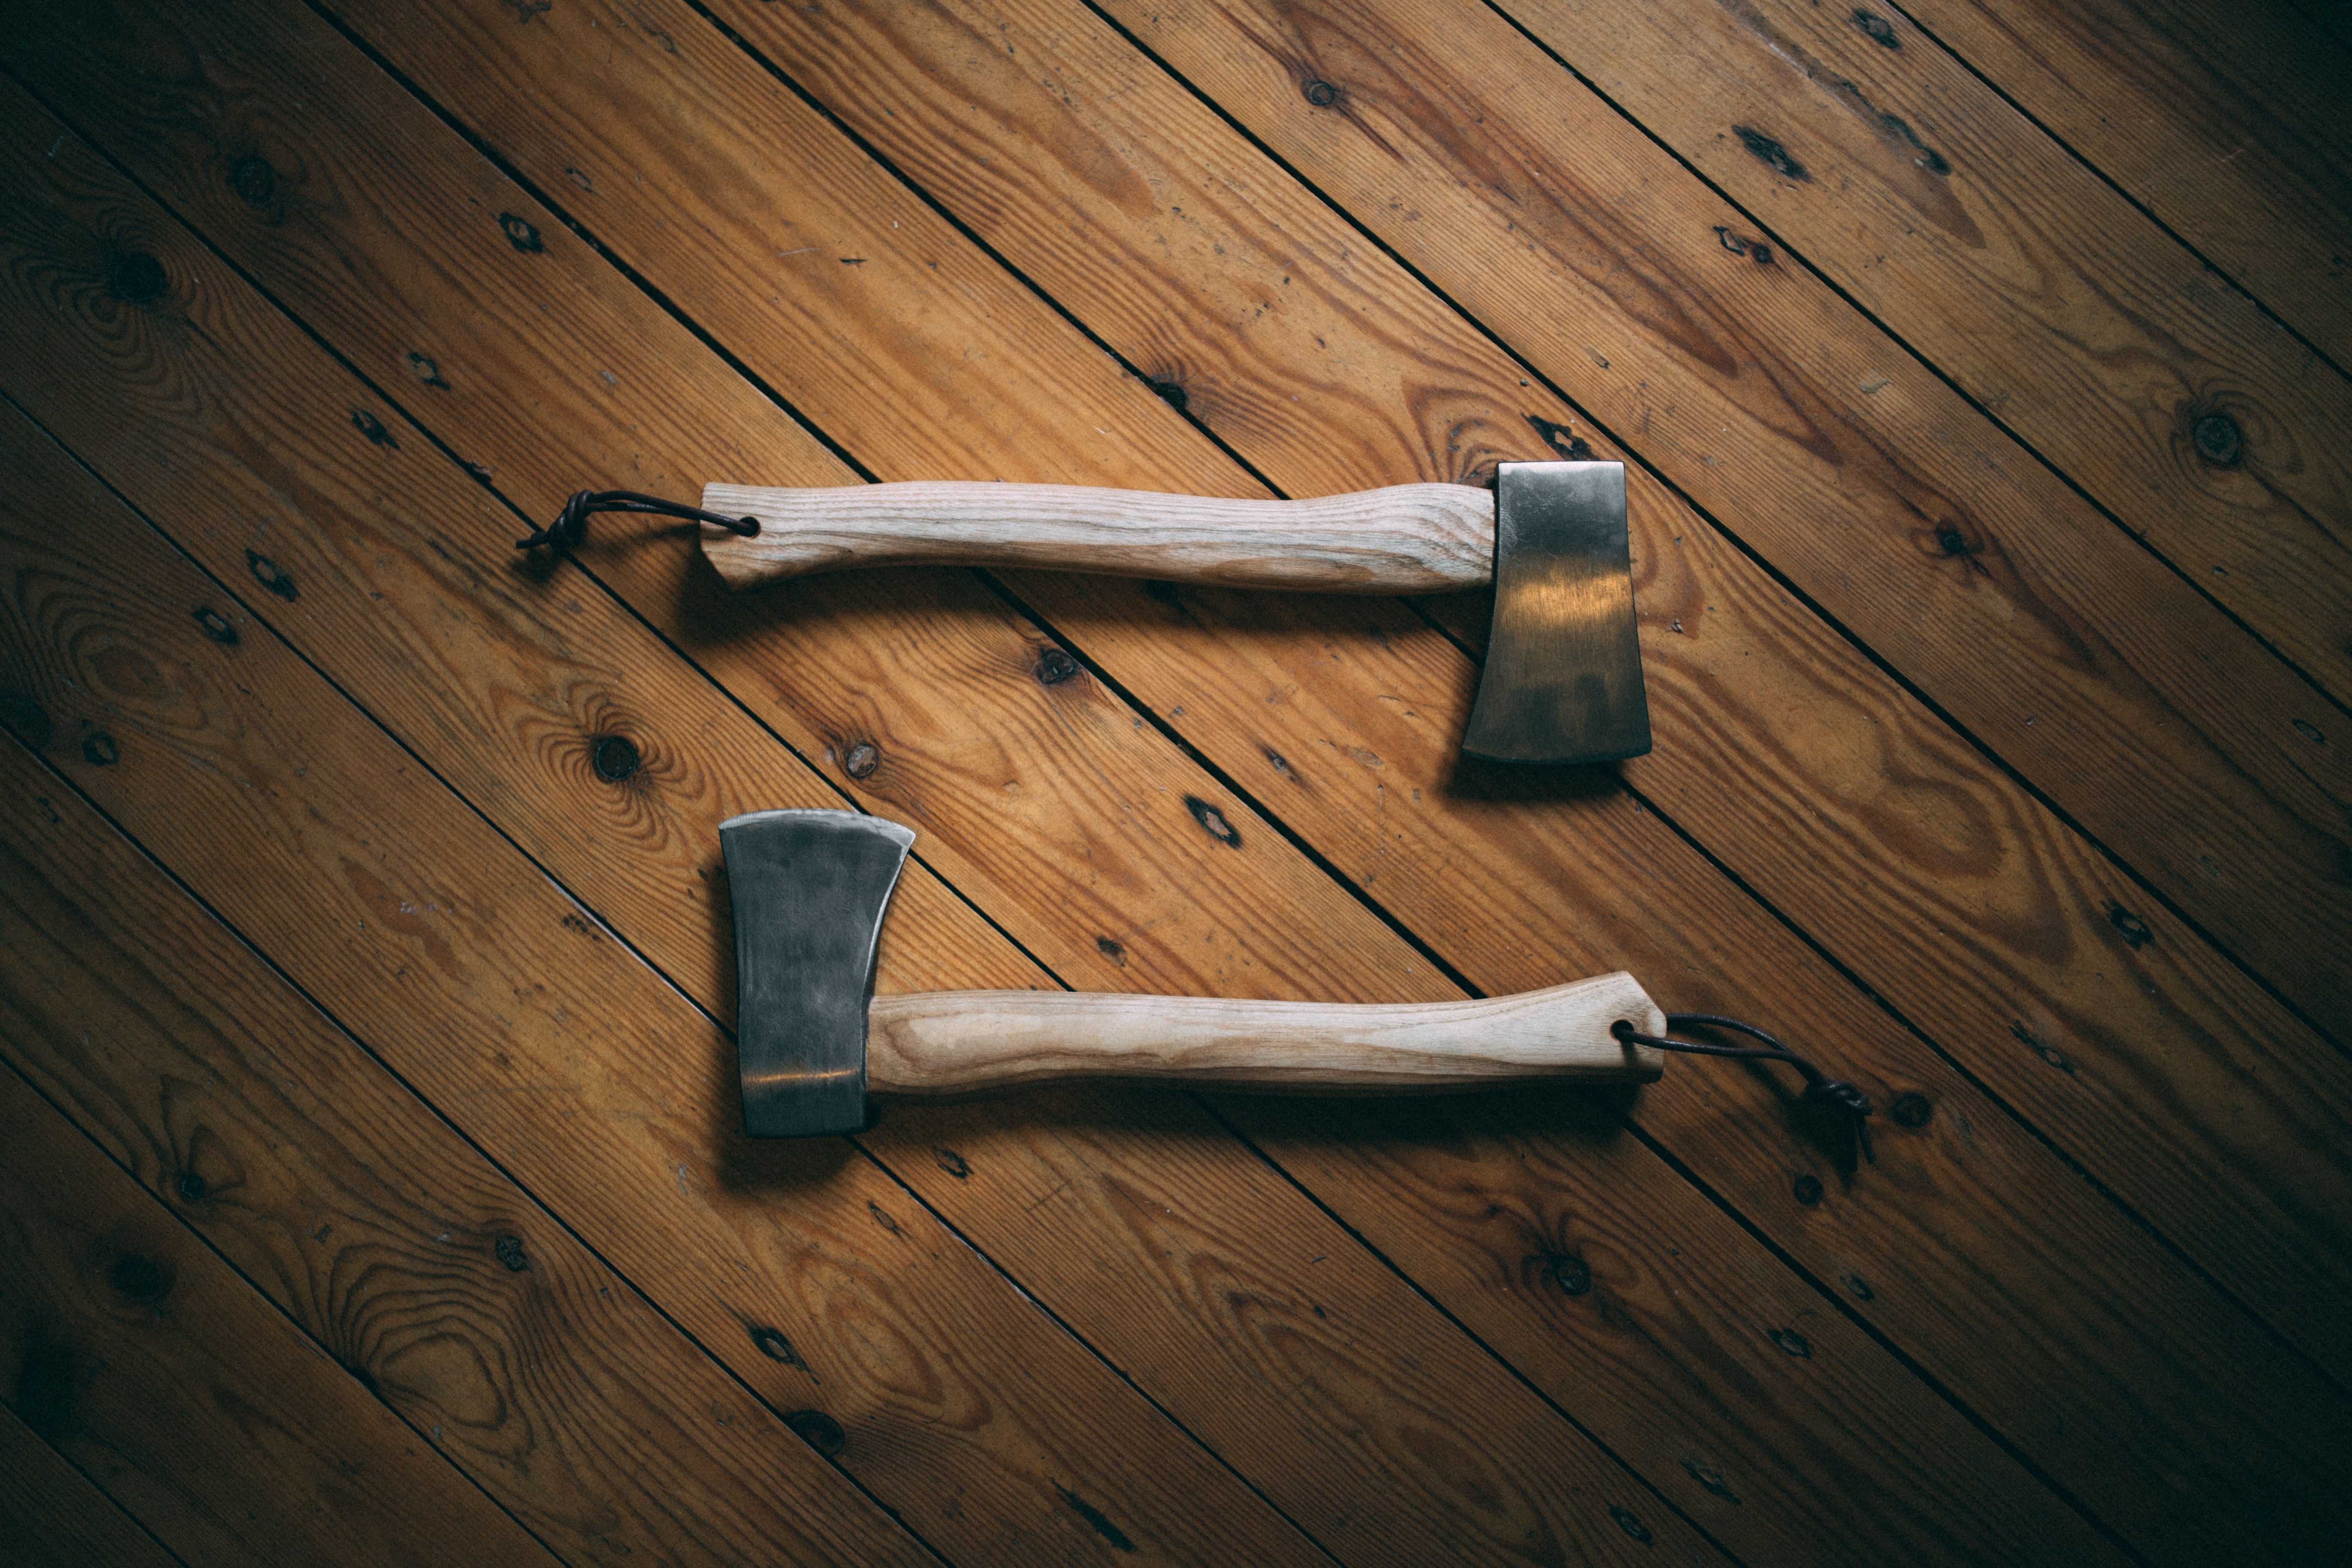 pair of hatchets on wooden surface